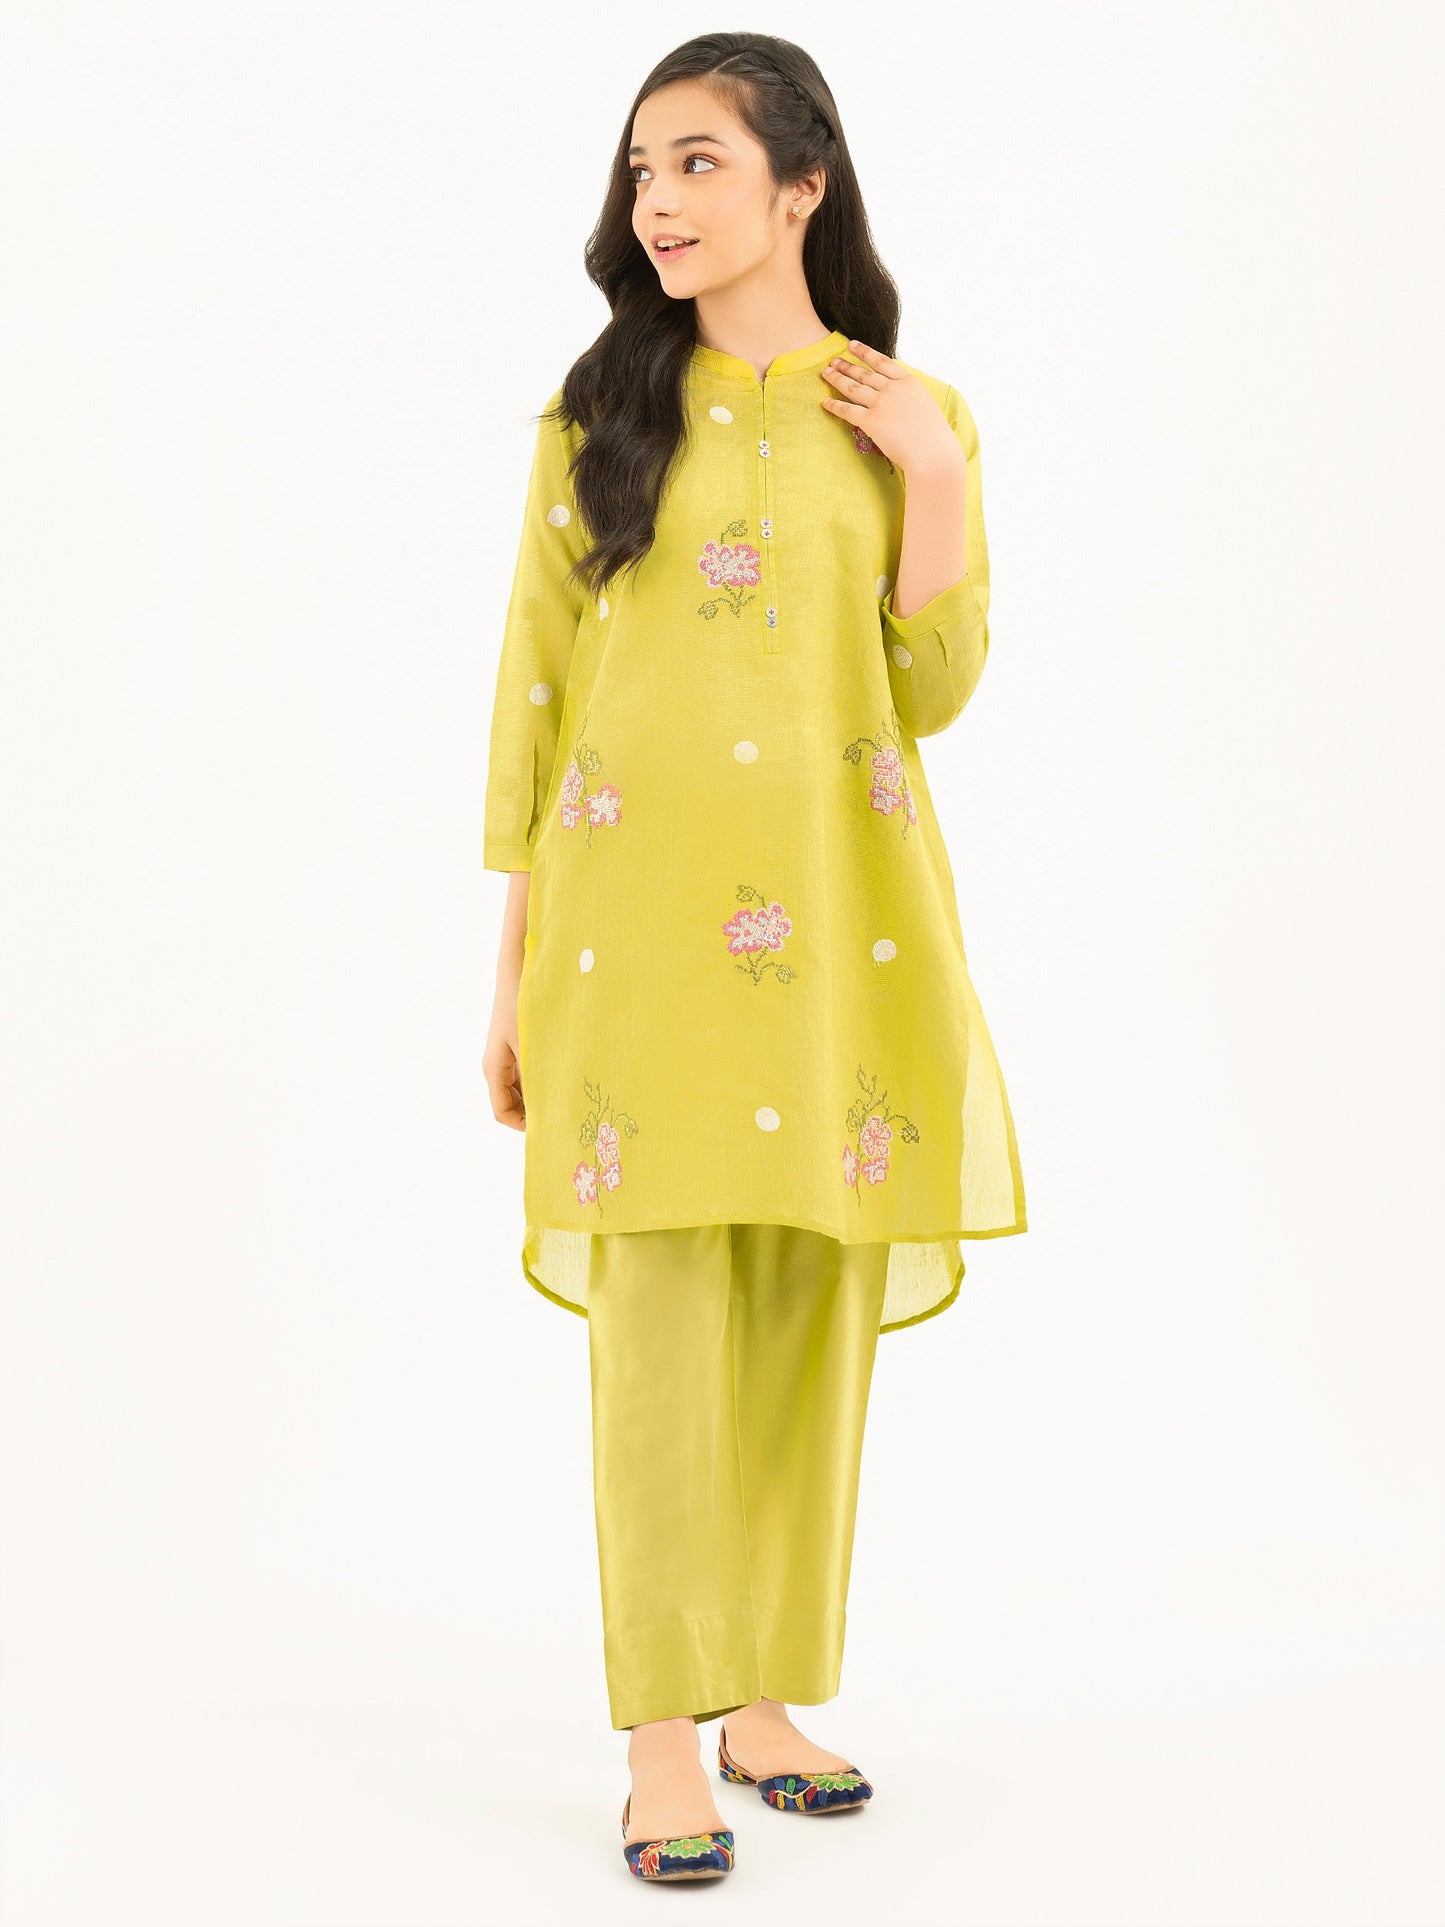 2 Piece Net Suit-Embroidered (Pret)